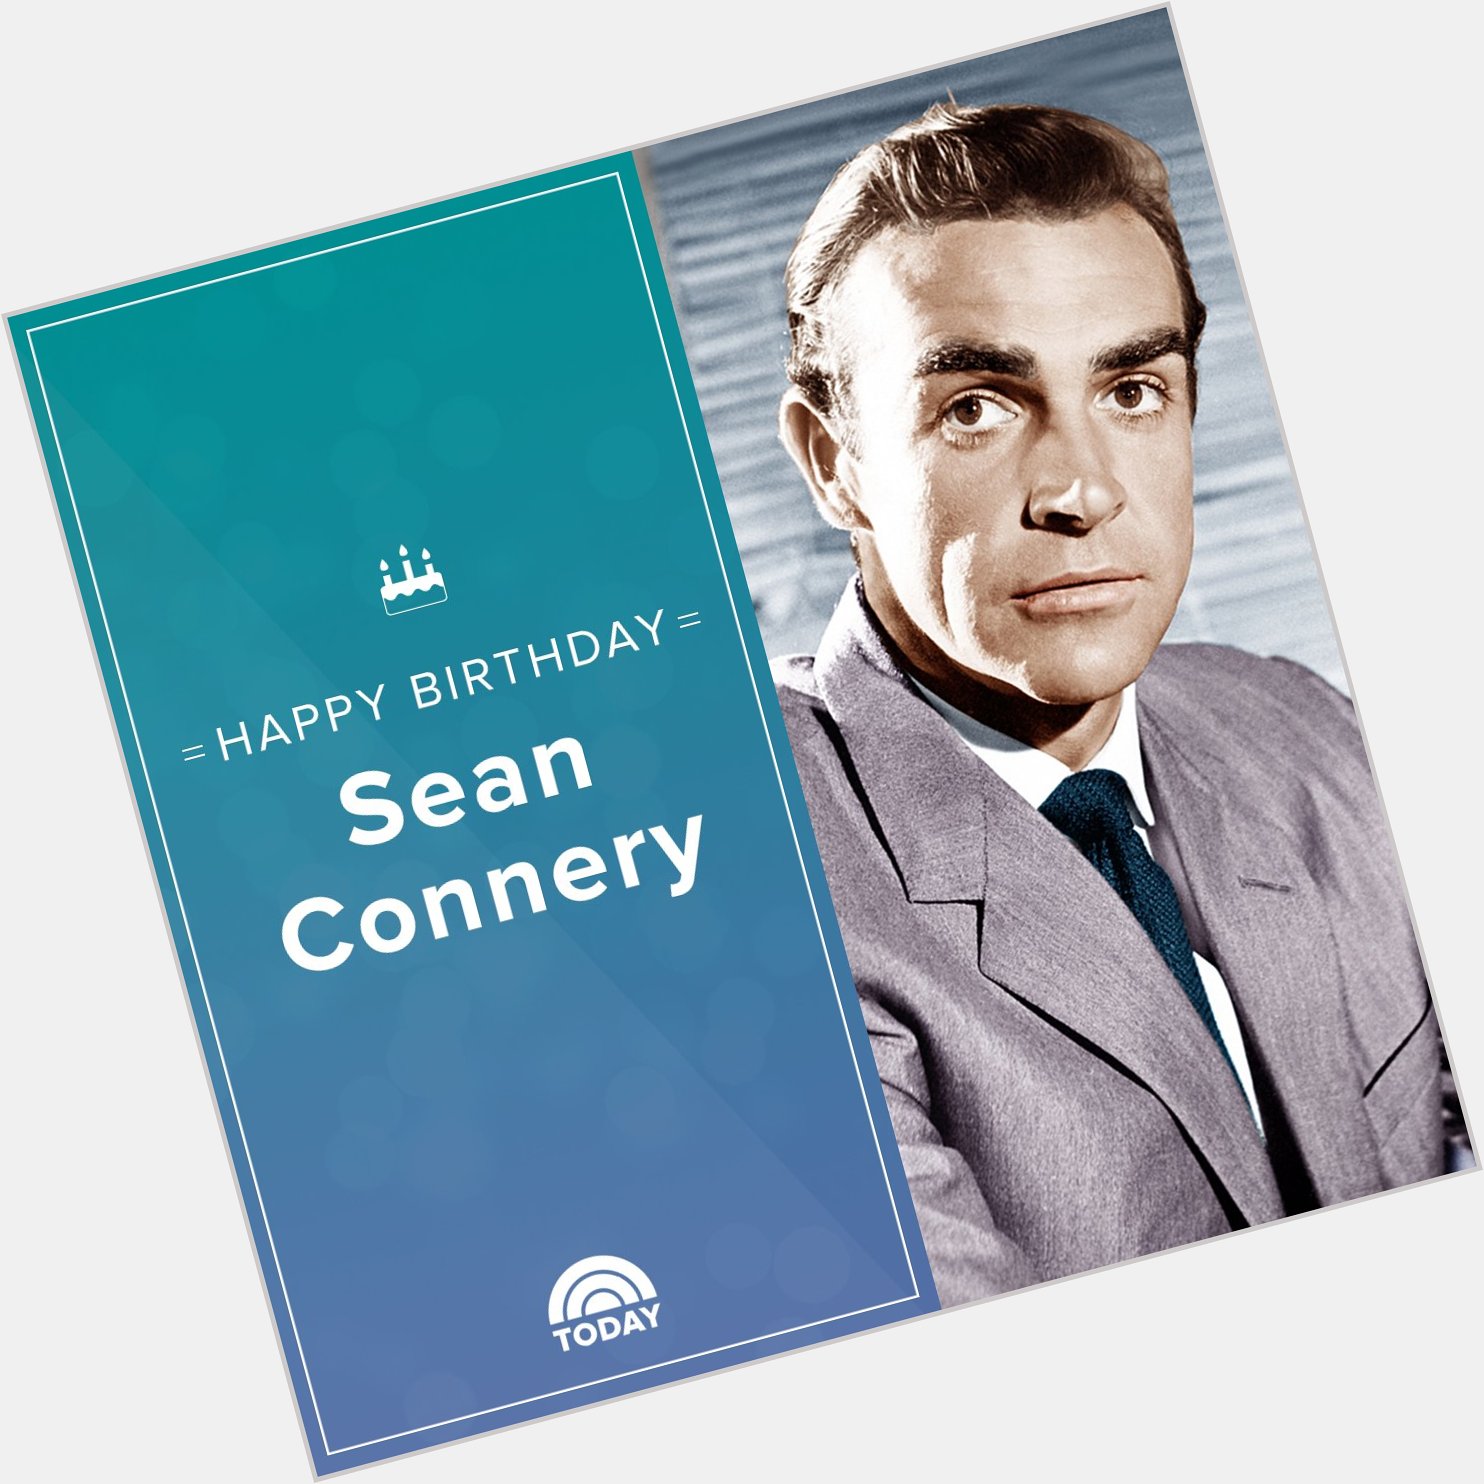 Happy birthday to the dapper Sean Connery!  